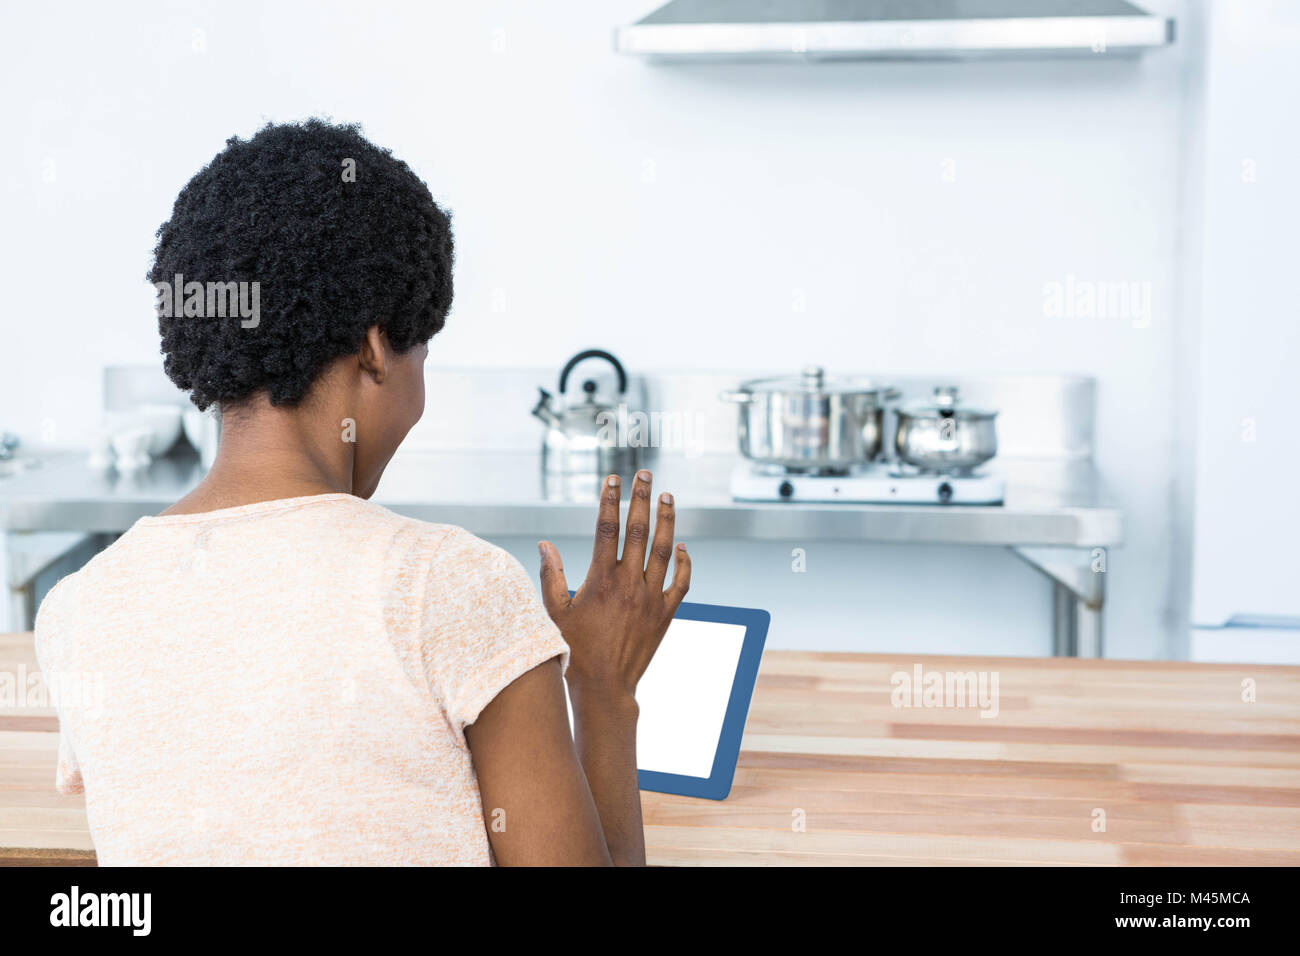 Pregnant woman using digital tablet in kitchen Stock Photo